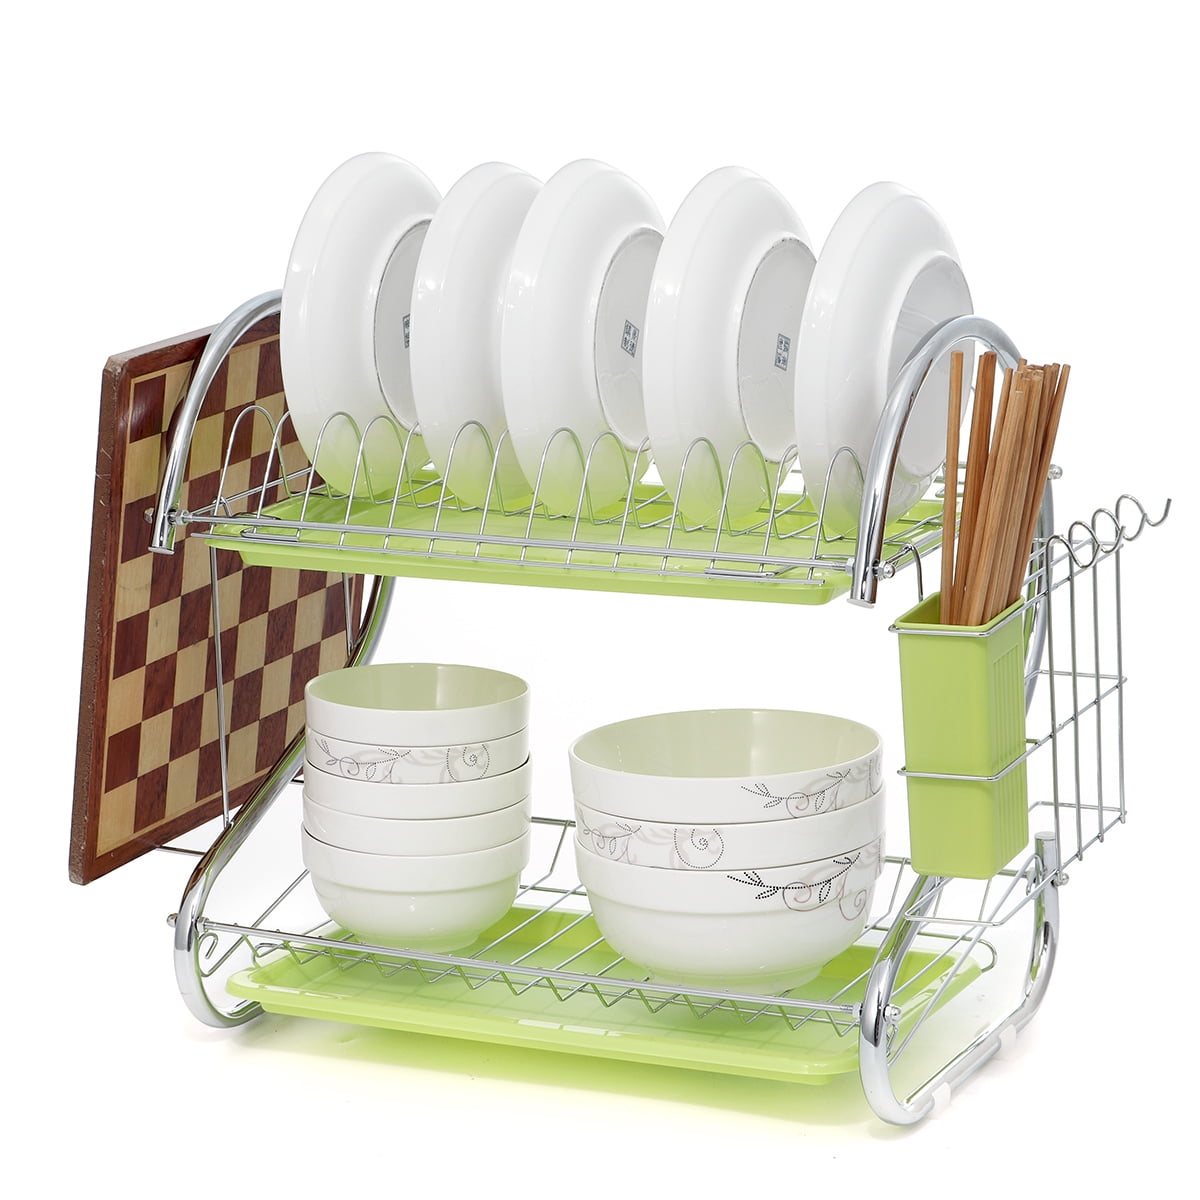 FVSA Over The Sink Dish Drying Rack, 2-Tier Large Dish Racks for